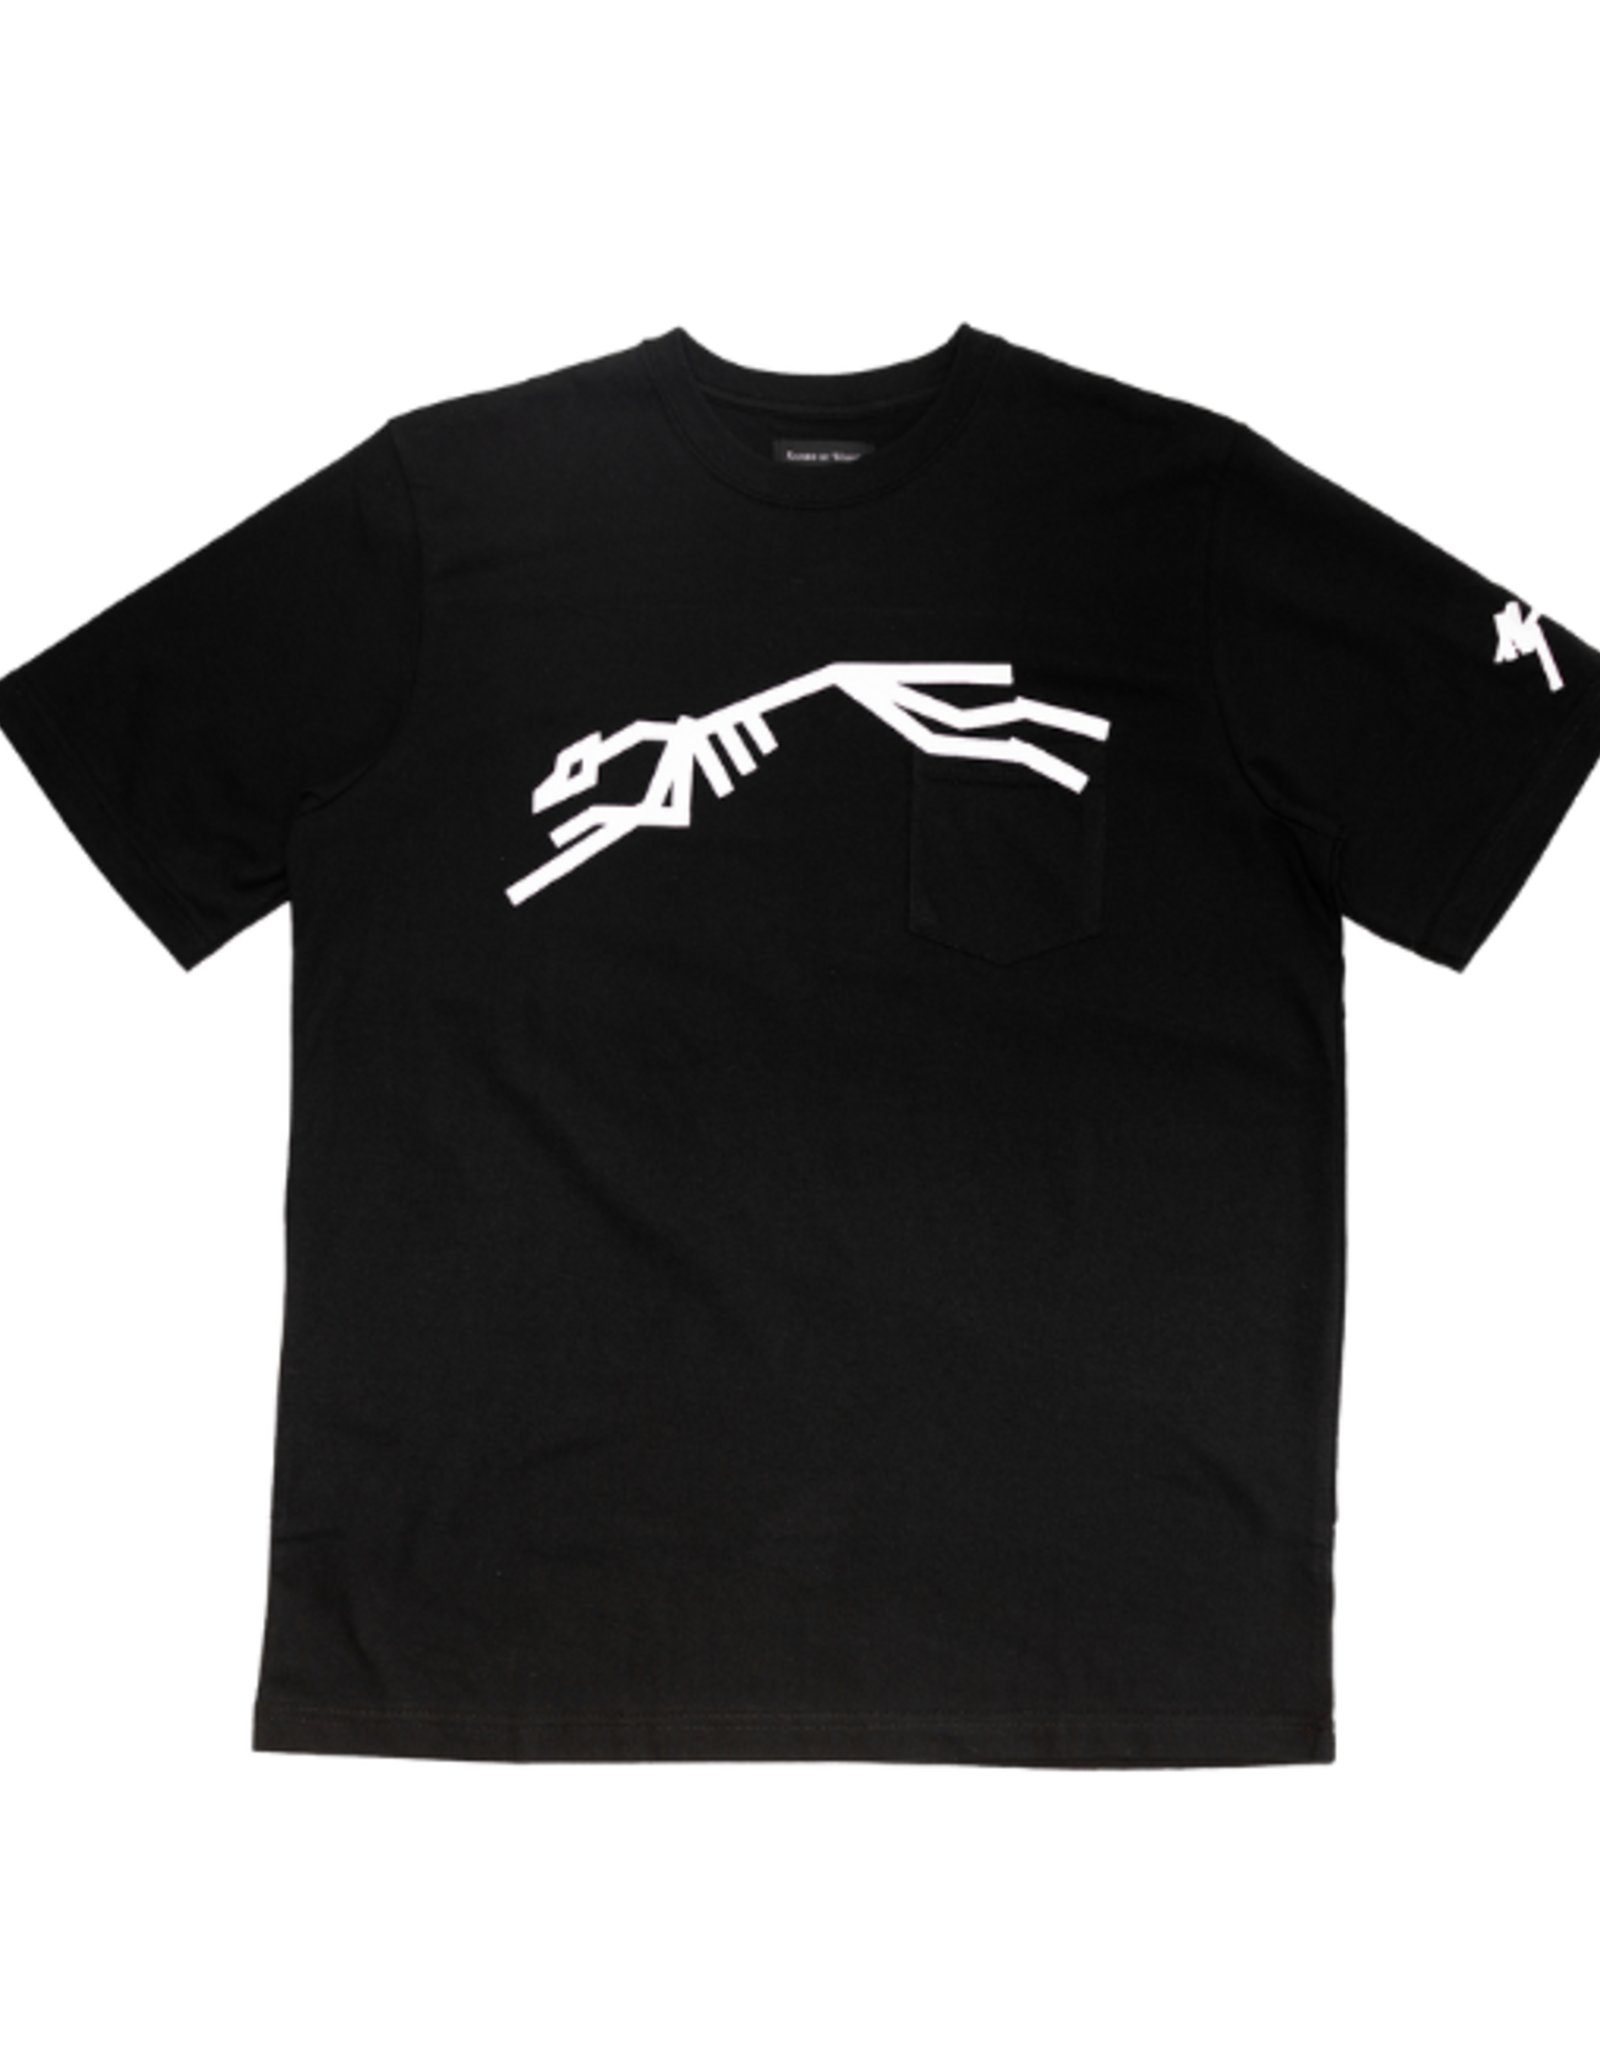 RAISED BY WOLVES RAISED BY WOLVES - AG GALLOP POCKET TEE BLACK